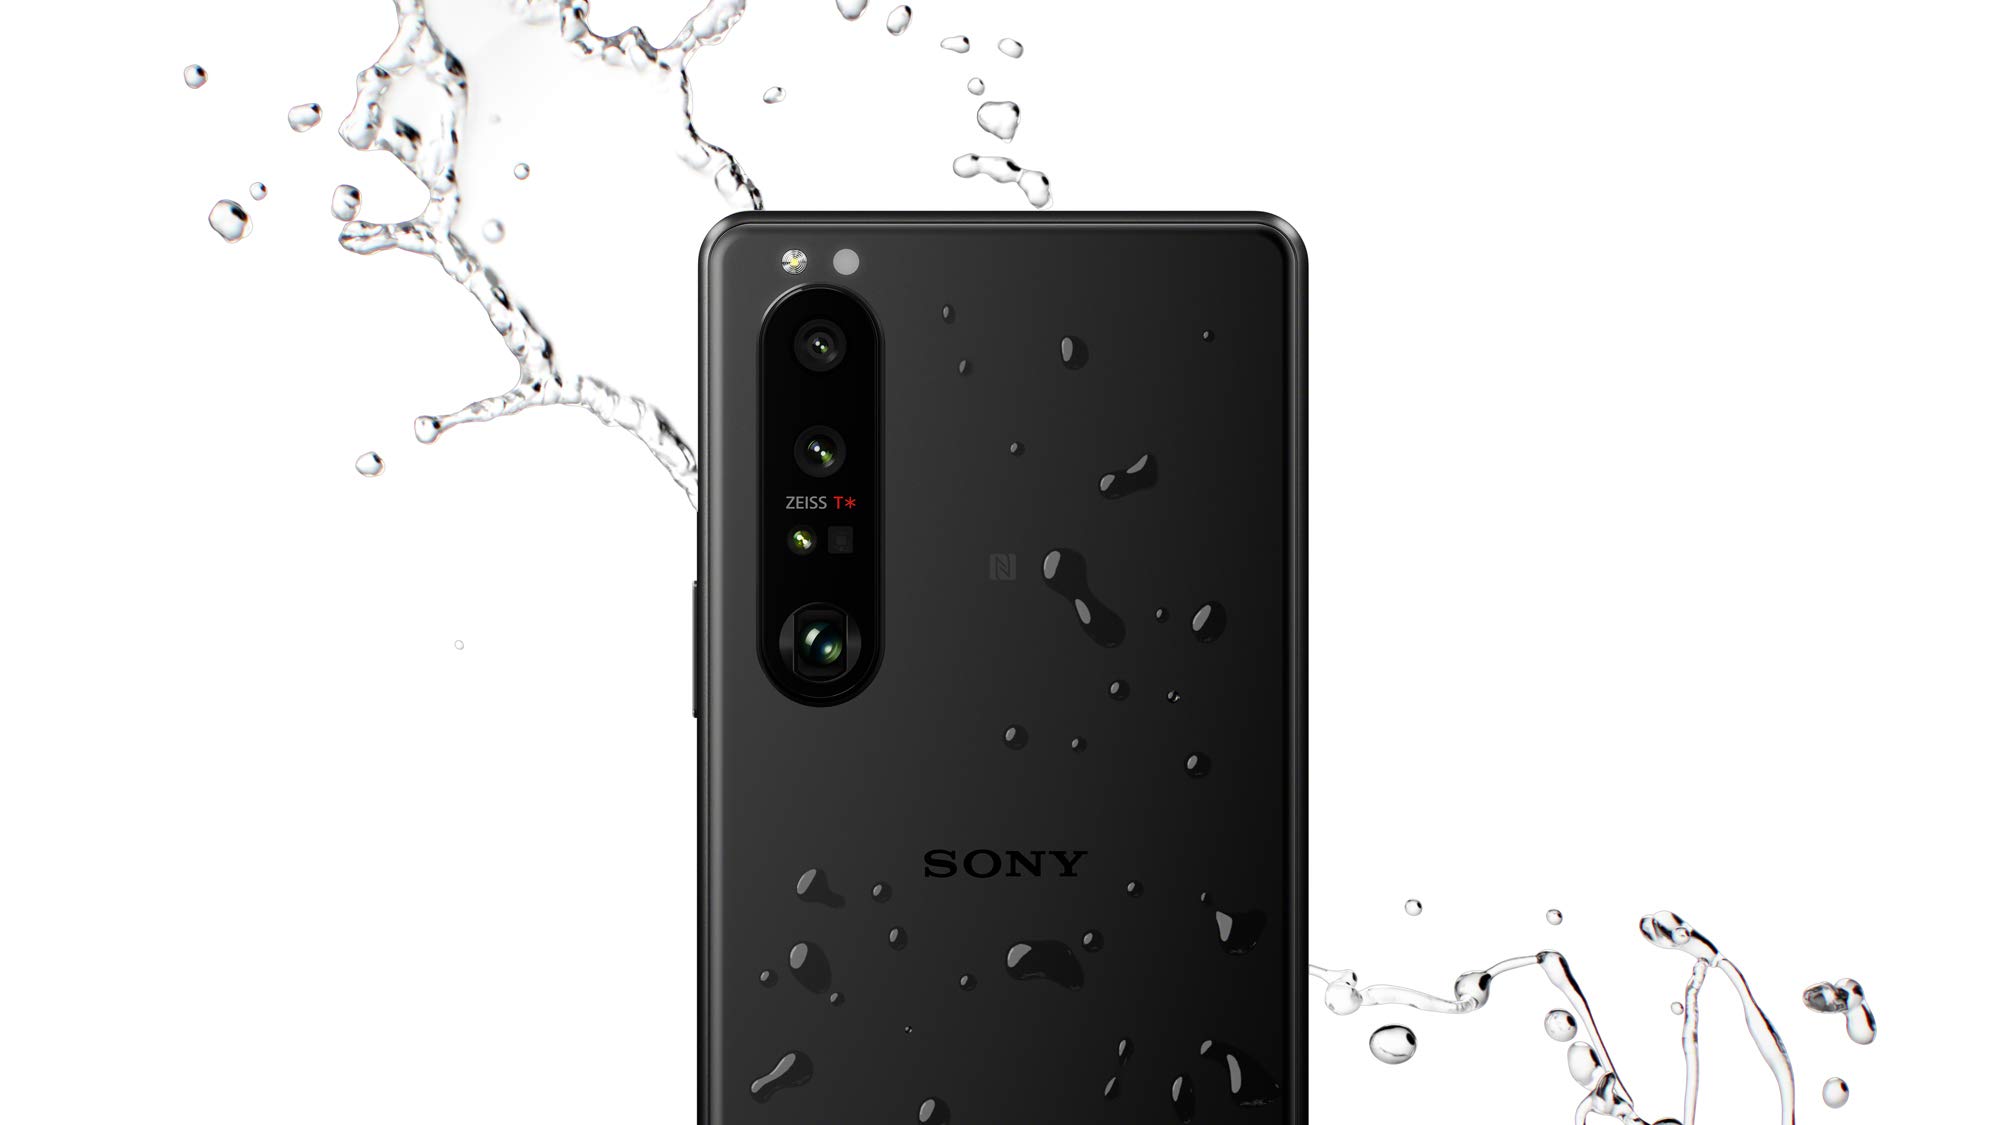 Xperia 1 III - 5G Smartphone with 120Hz 6.5